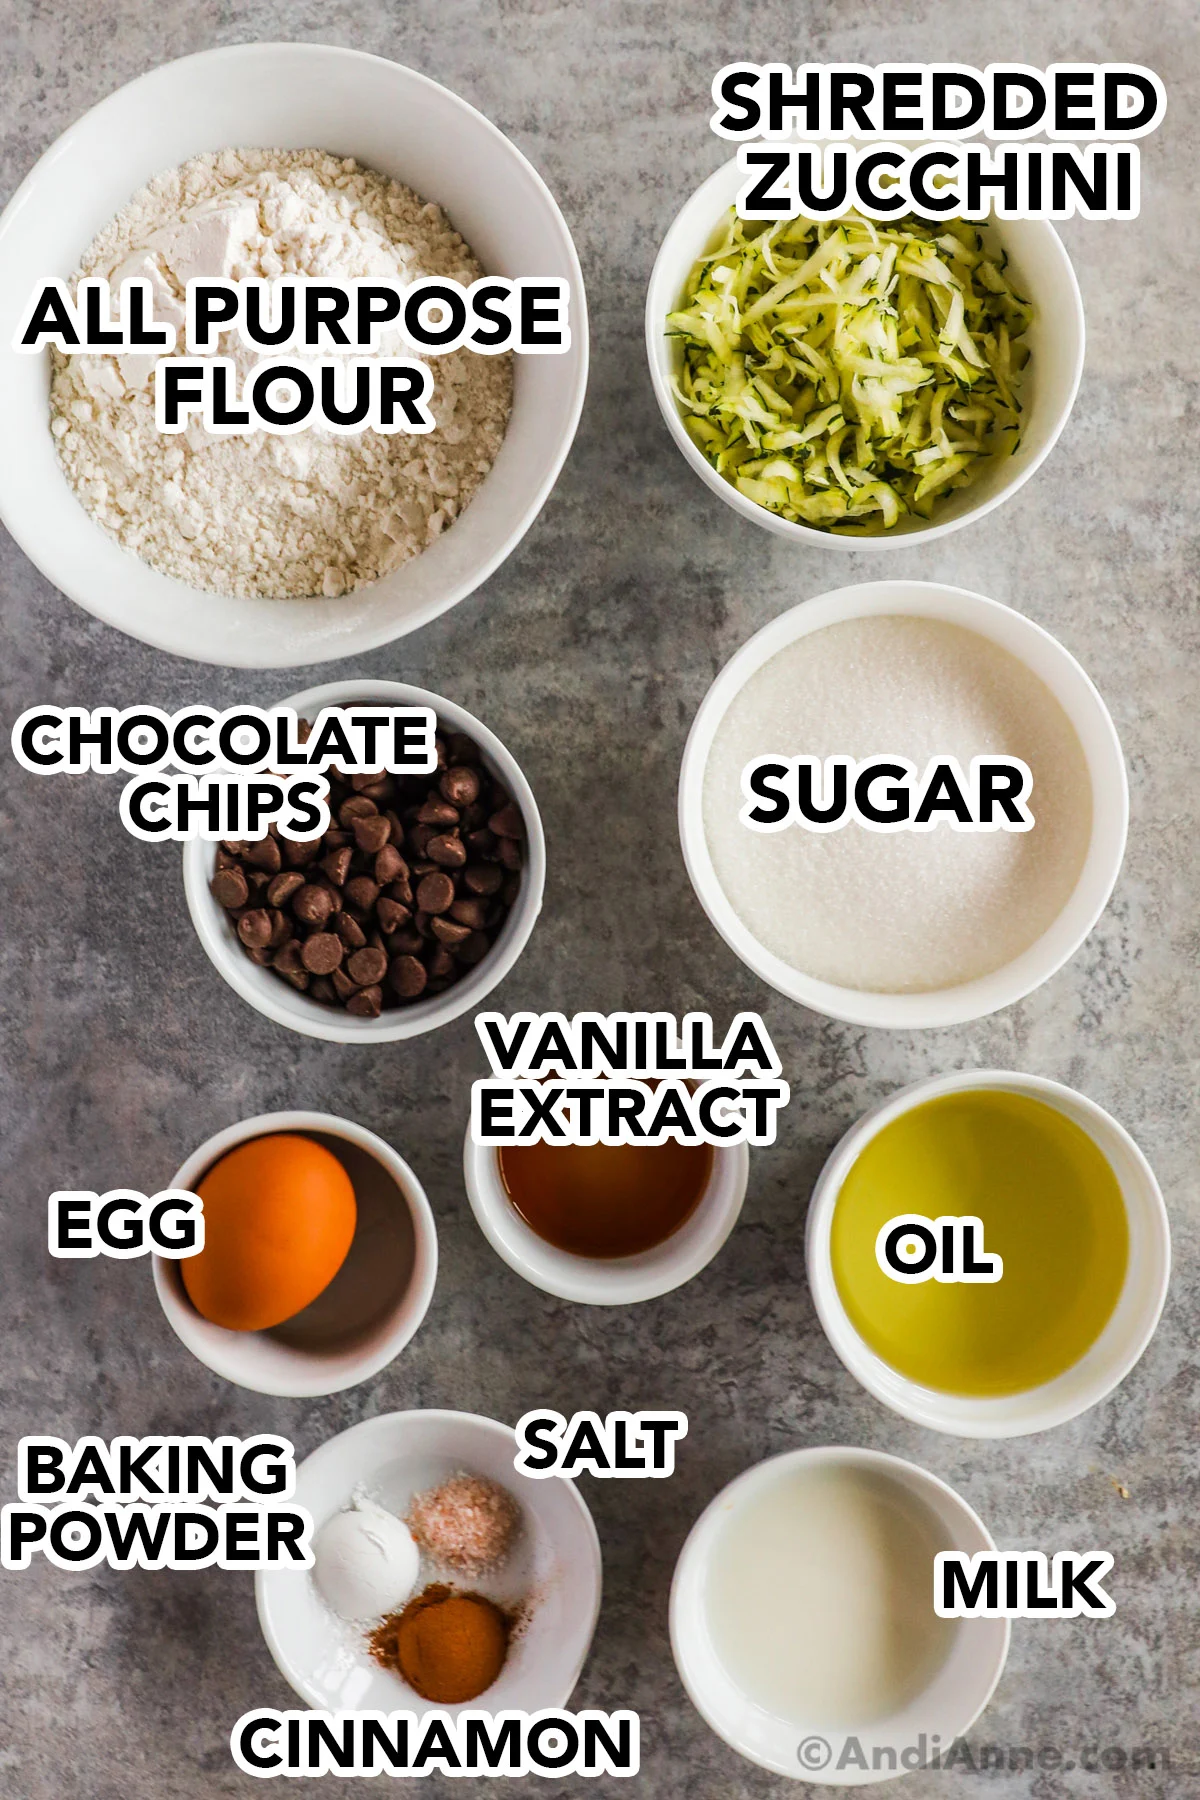 Recipe ingredients in bowls on the counter including flour, shredded zucchini, chocolate chips, sugar, vanilla extract, oil, egg, milk, and cinnamon.